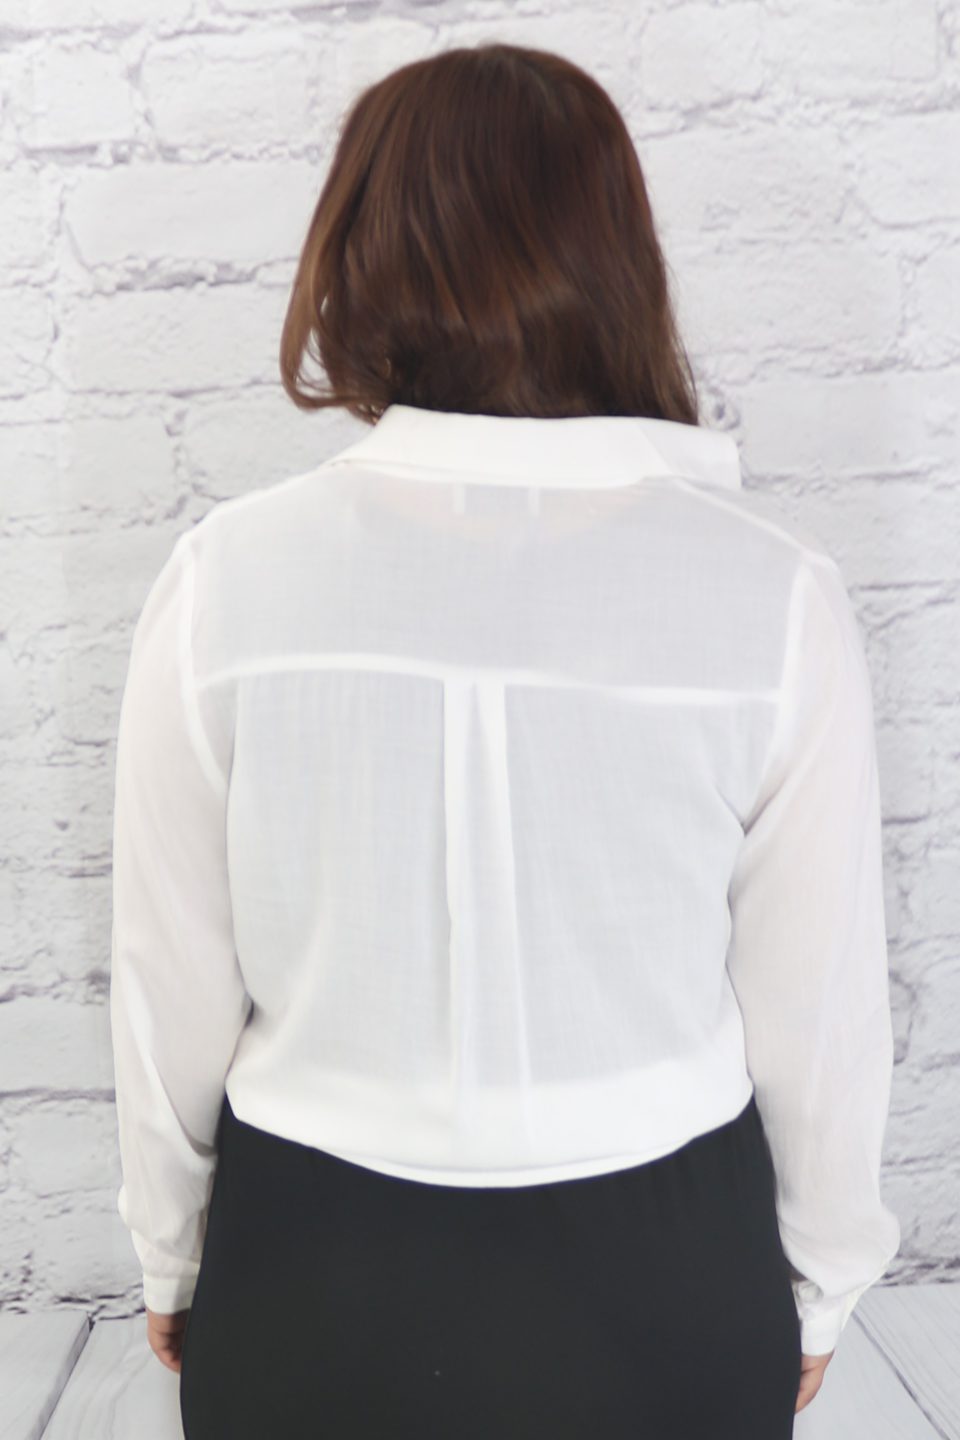 Tie front/back blouse  Ivy and Pearl Boutique   